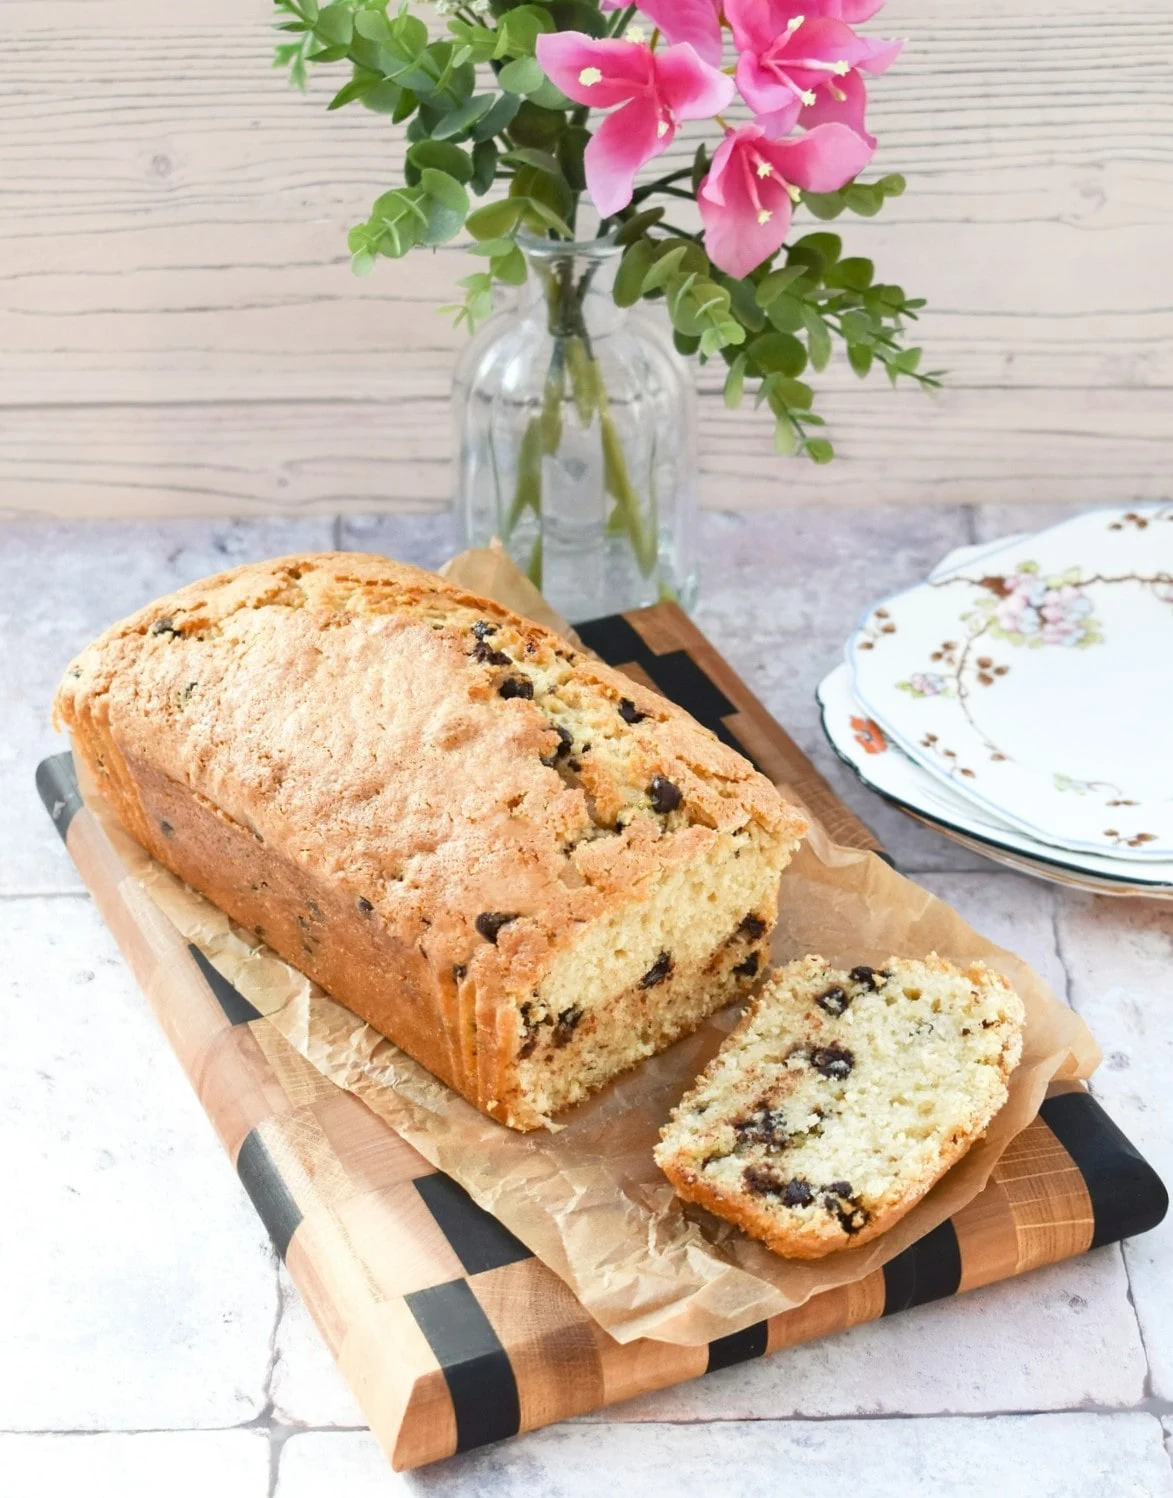 Choc chip loaf cake on a wooden board